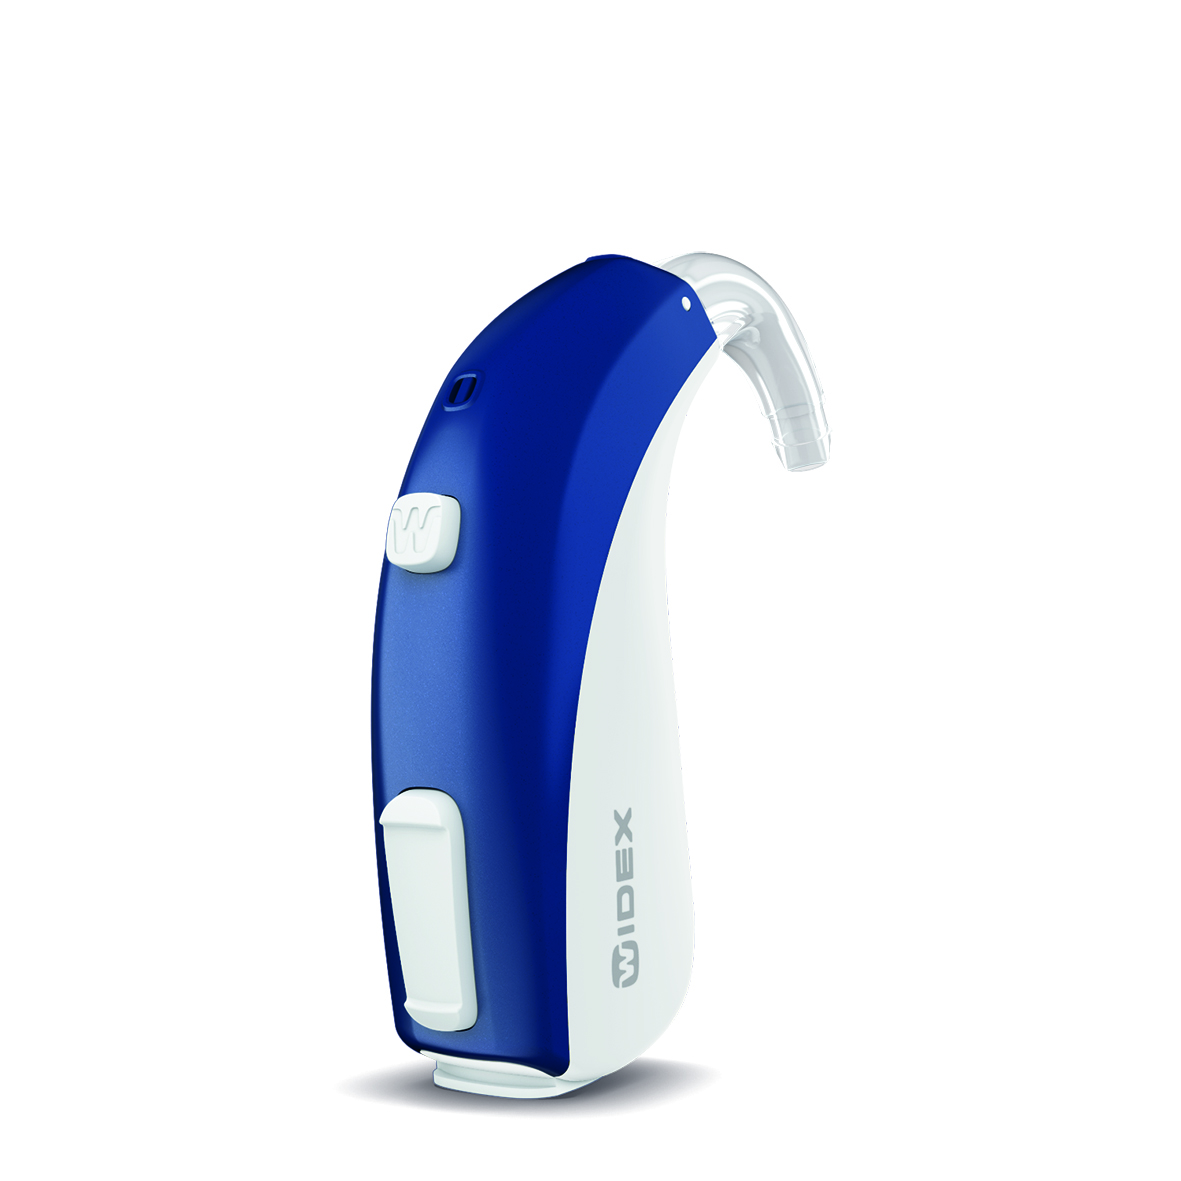 Product picture of Widex hearing aid